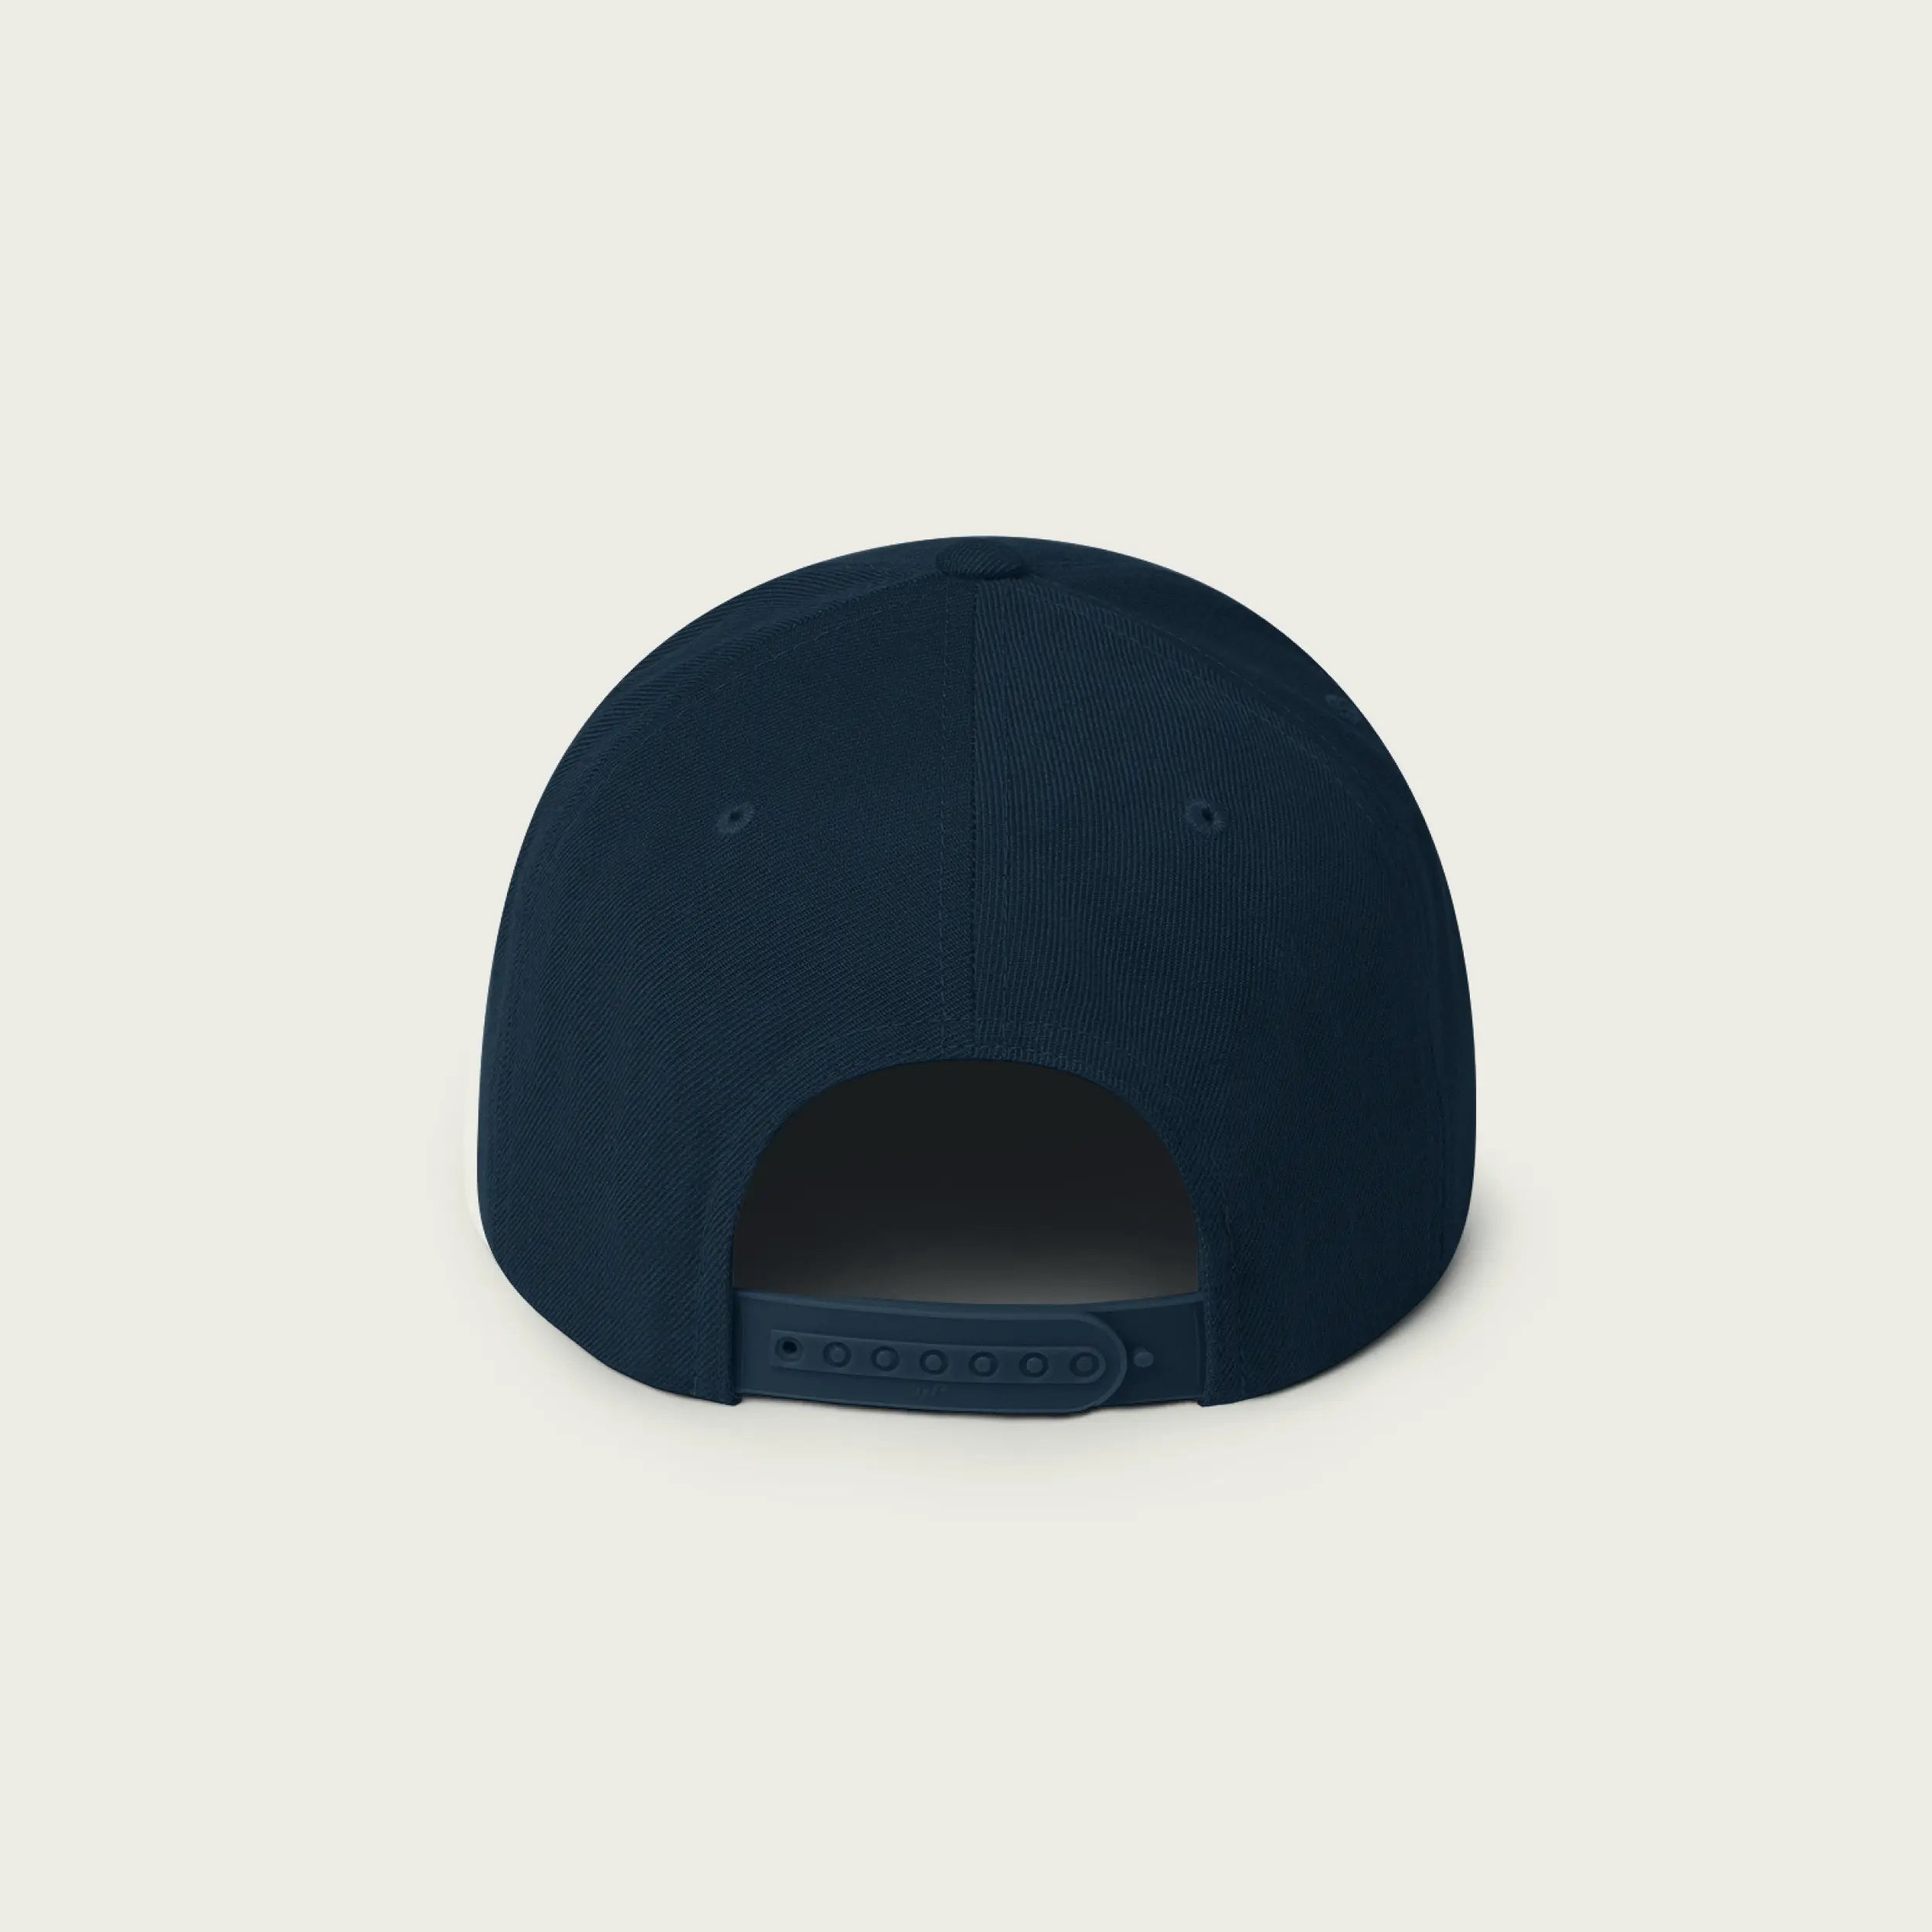 Upgrade your headwear game with the Session Goods Snapback – showcasing our signature Session wordmark in style.